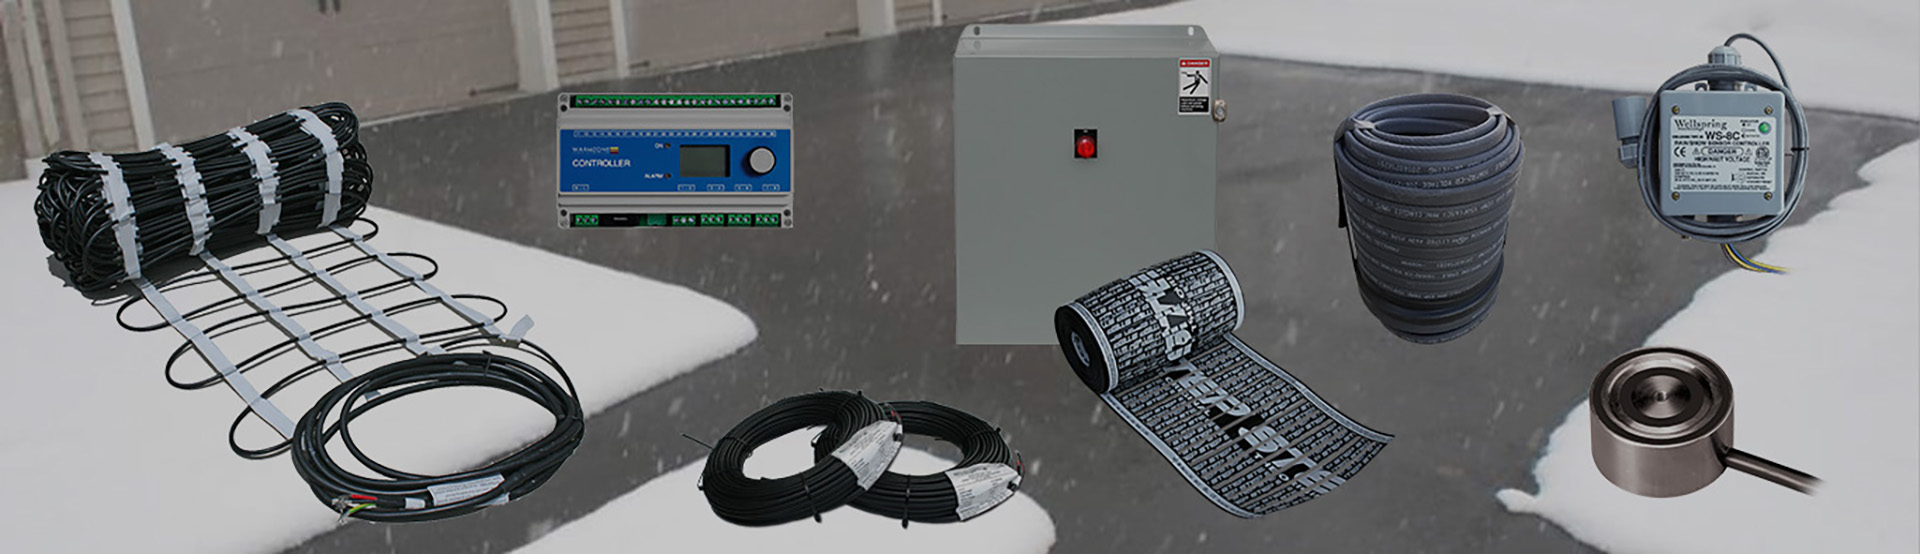 Snow melting system components shop now banner